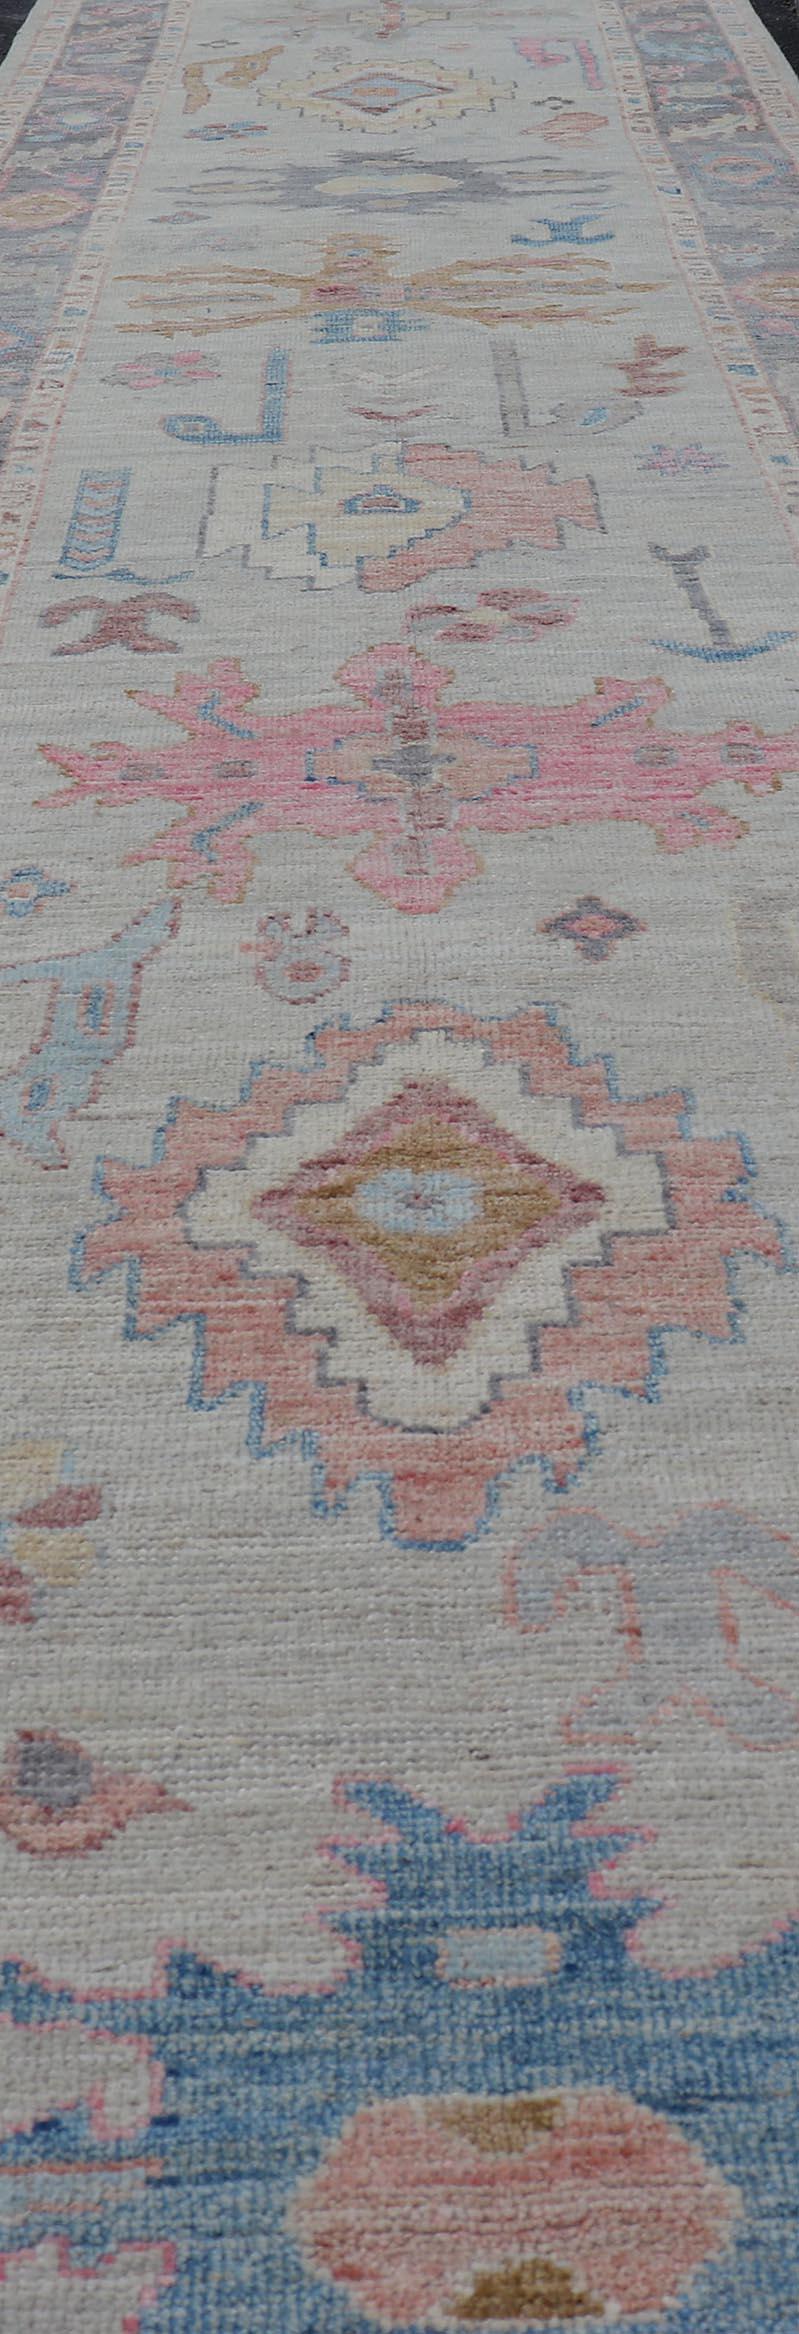 This long Oushak runner has a cream background with a light charcoal border. The border has a leaflet-like design is rendered in green, coral, and blue with a hint of yellow, while the main field's tribal design is rendered in a sandy bronze, gold,